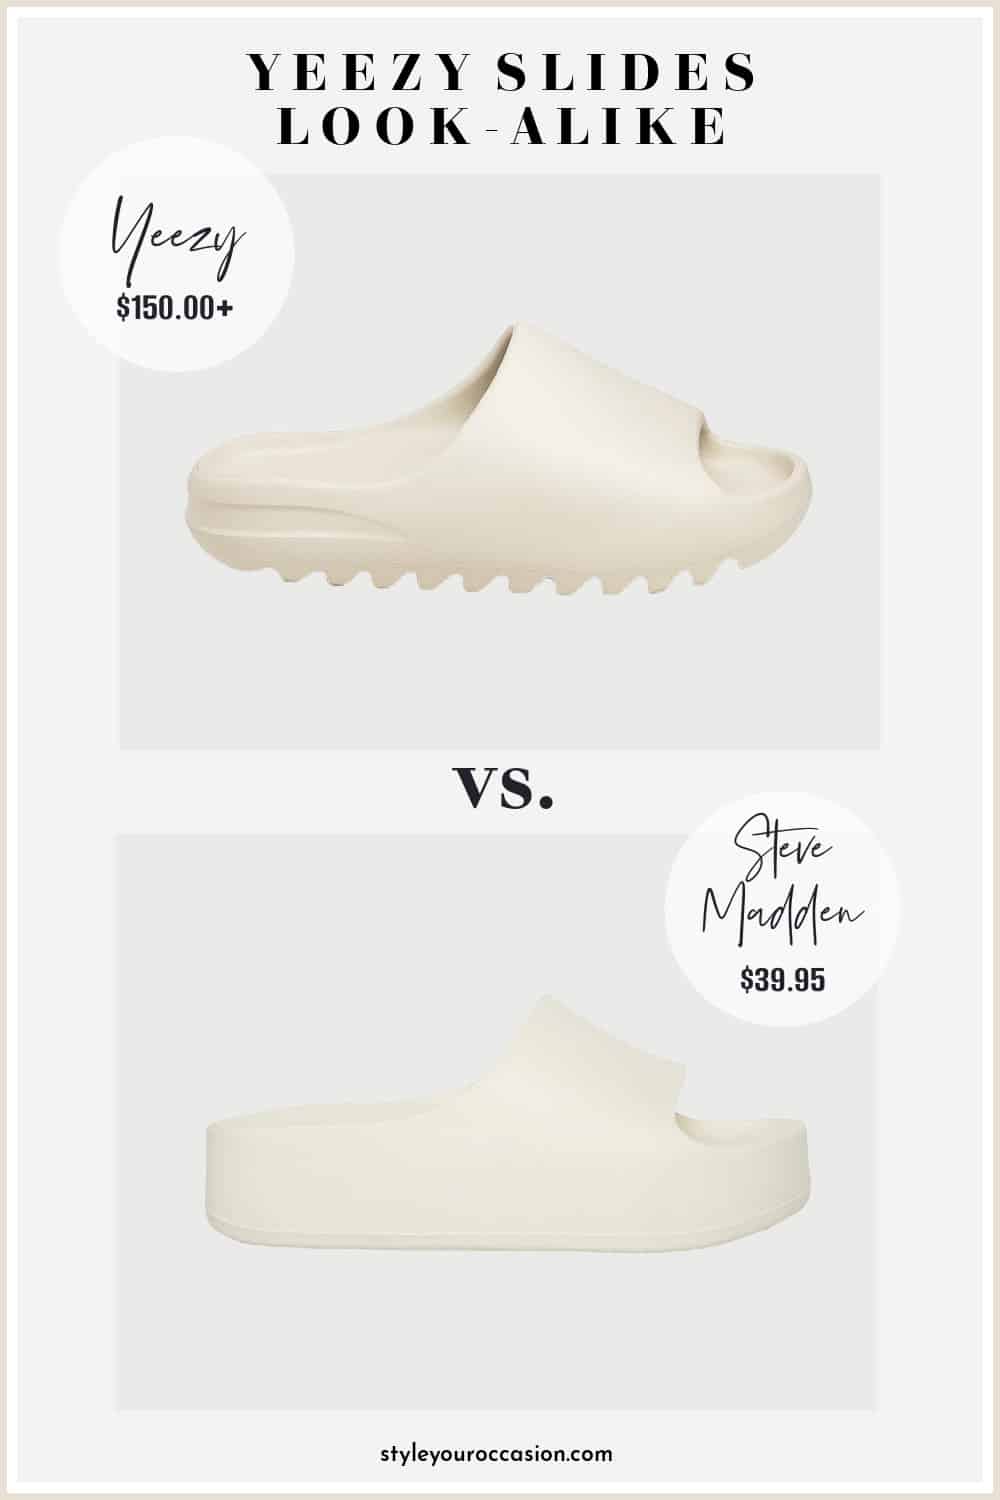 image comparing Yeezy slides with a "bone" color look-alike sandal from Steve Madden